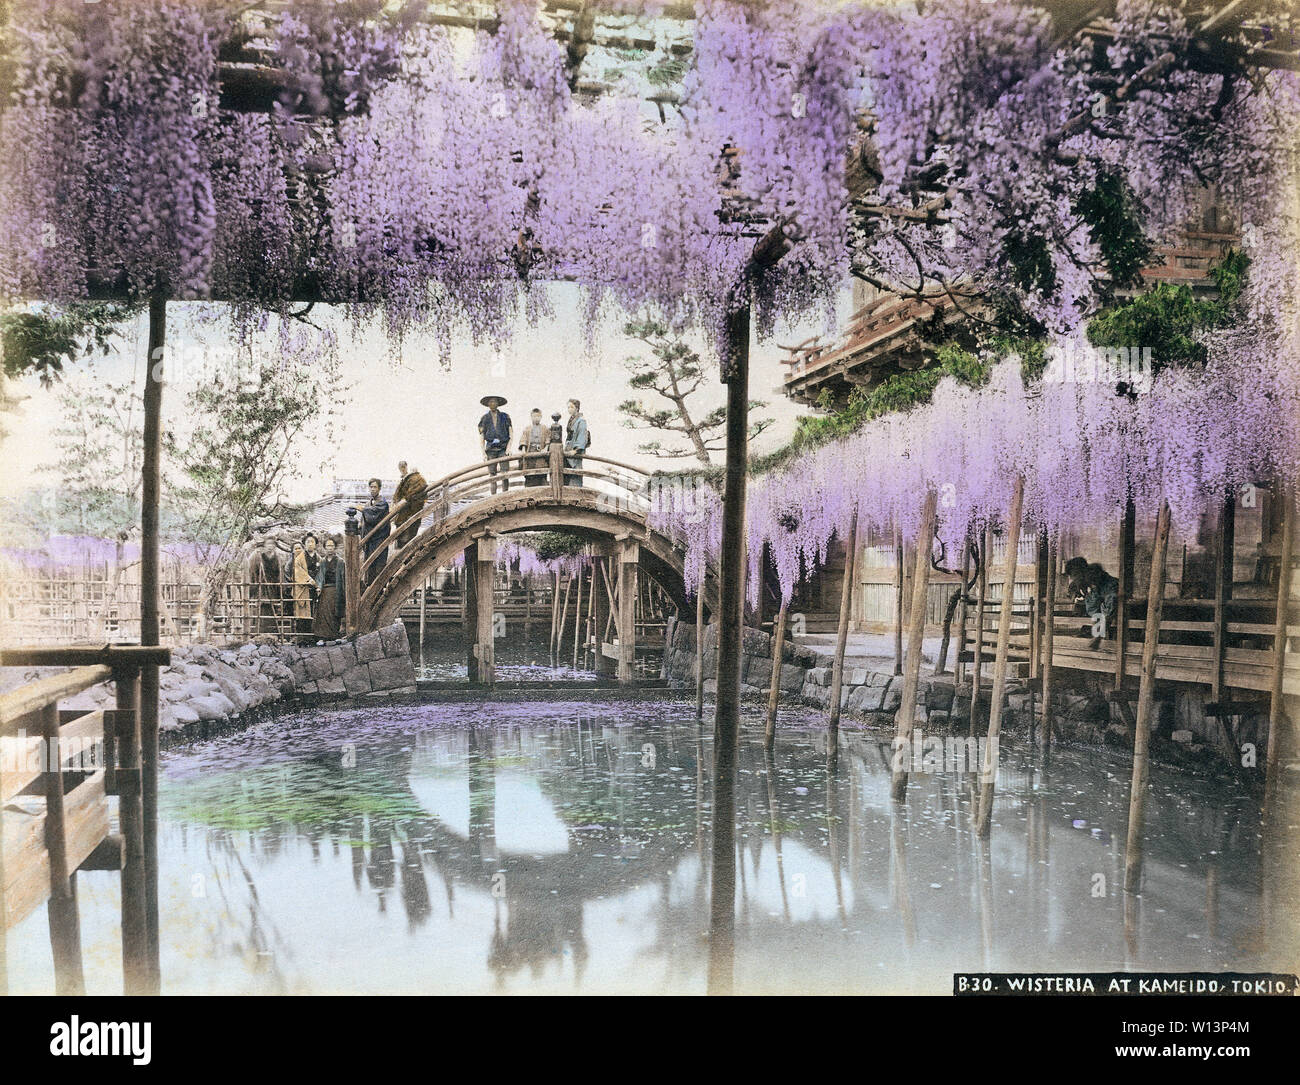 [ 1890s Japan - Wisteria at Kameido Tenjinja Shrine, Tokyo ] —   Arched bridge at Kameido Tenjinja Shrine in Tokyo. The Shinto shrine, famous for its bridge and Wisteria, is dedicated to poet scholar and statesman Sugawara no Michizane (845-903). It therefore attracts many students who pray here before their examinations.  19th century vintage albumen photograph. Stock Photo